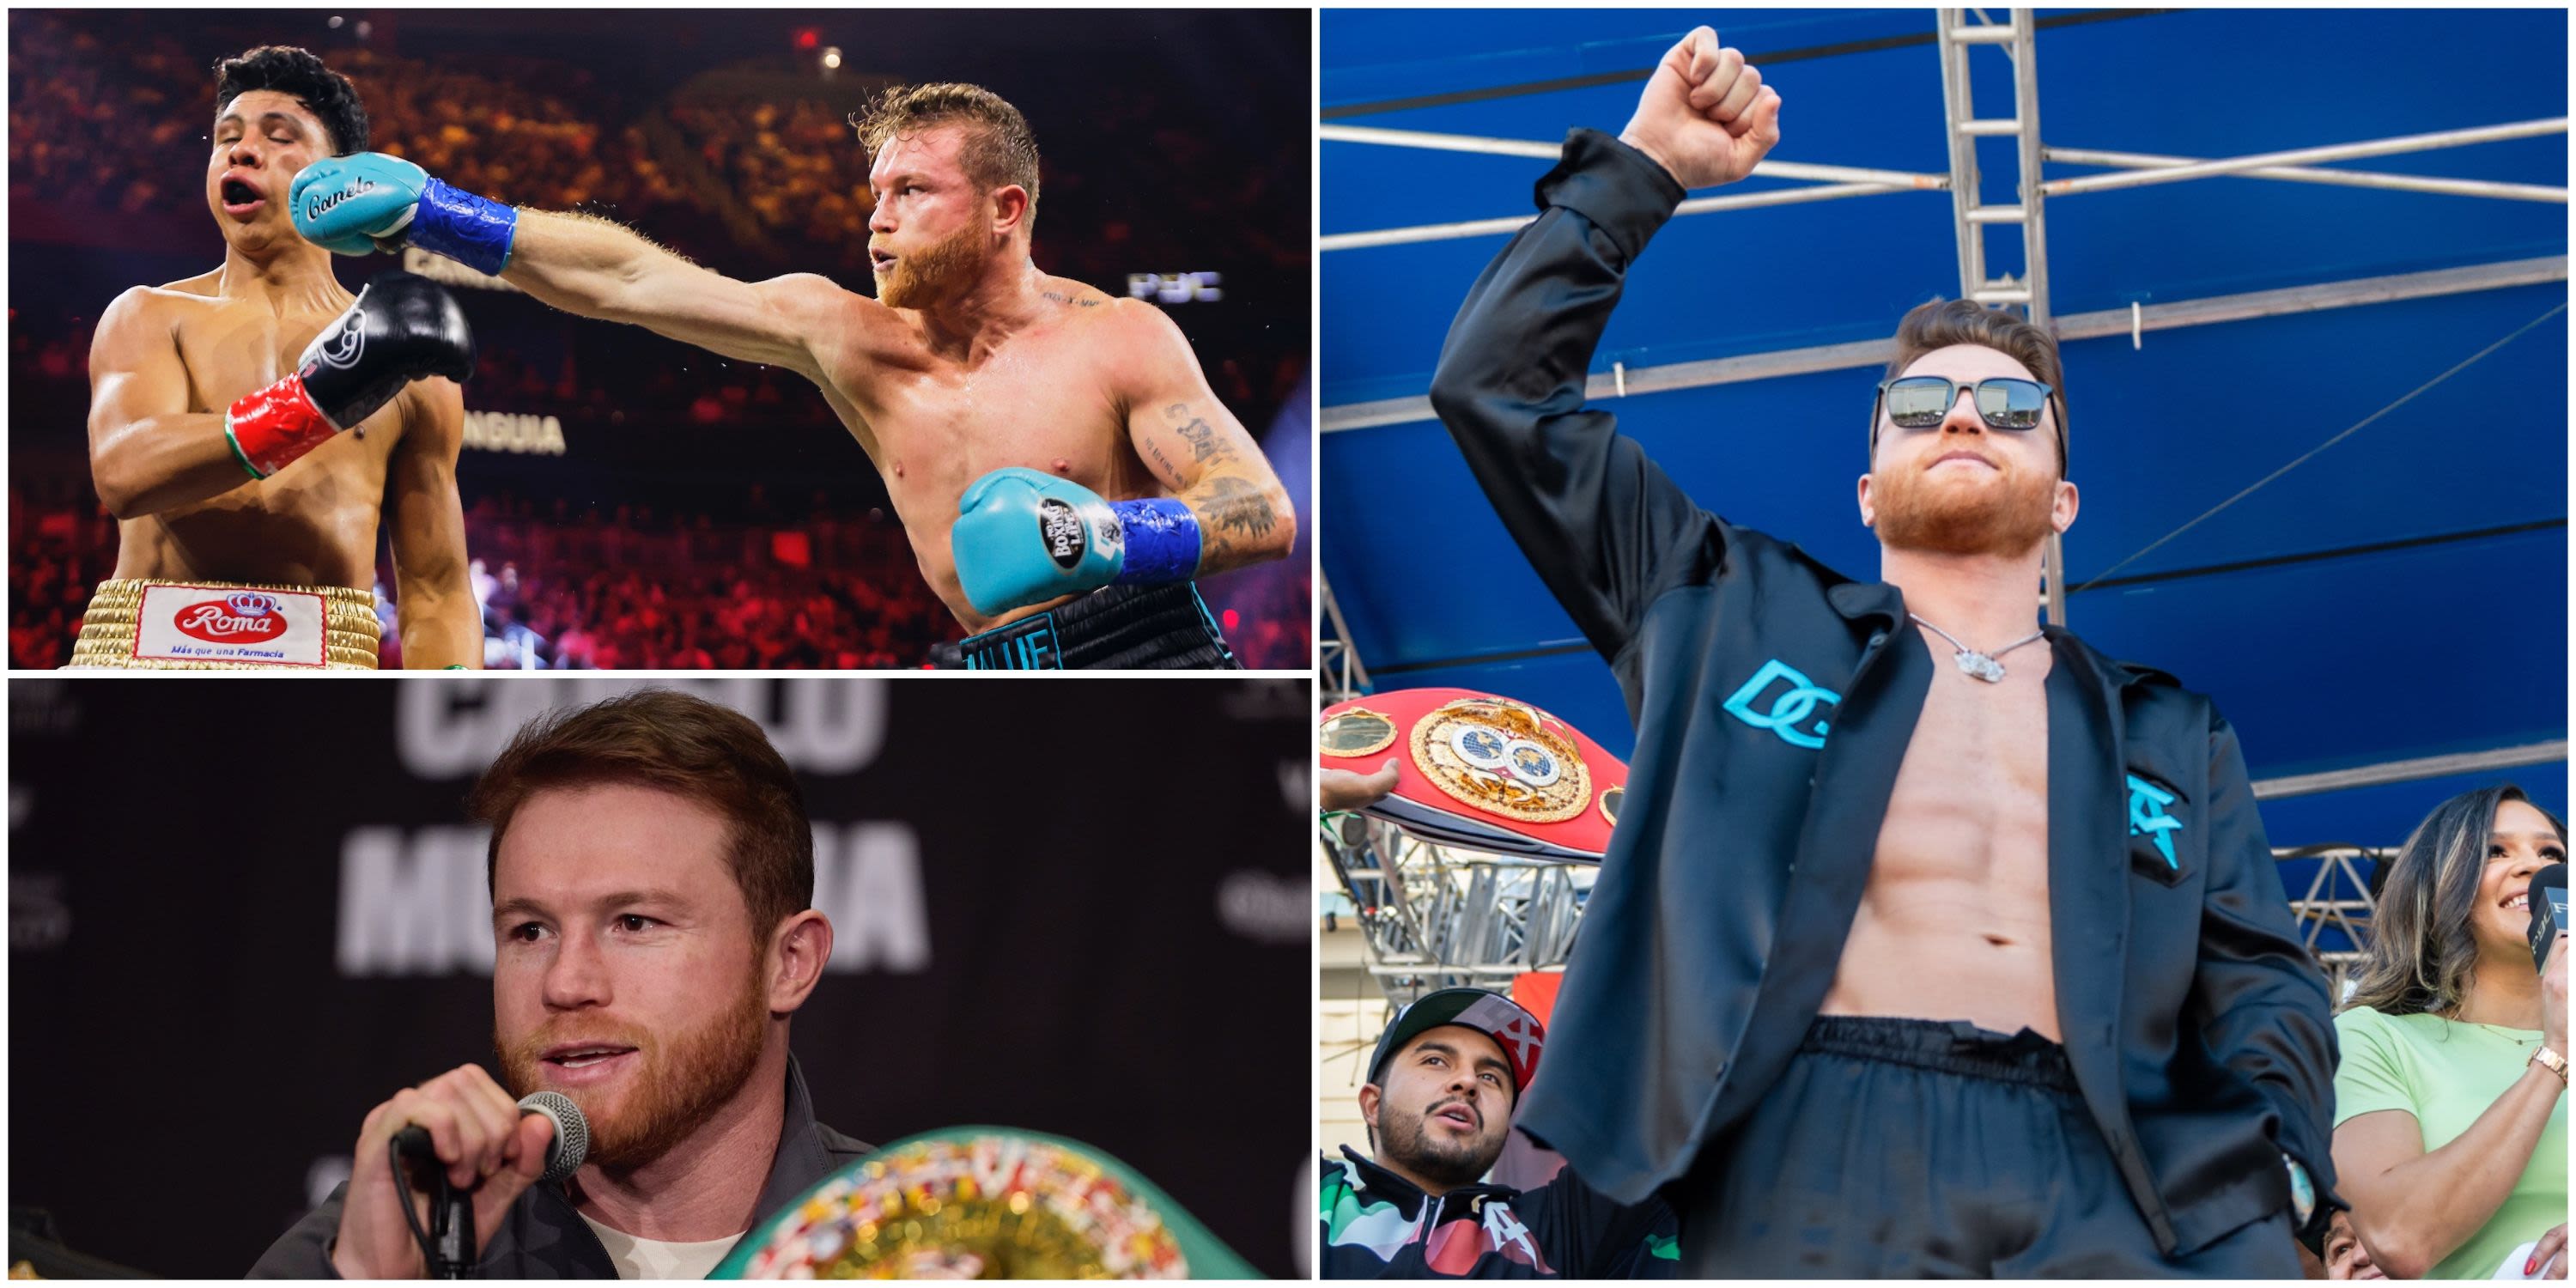 I look back at numerous Canelo events in Las Vegas, and can see one massive change today